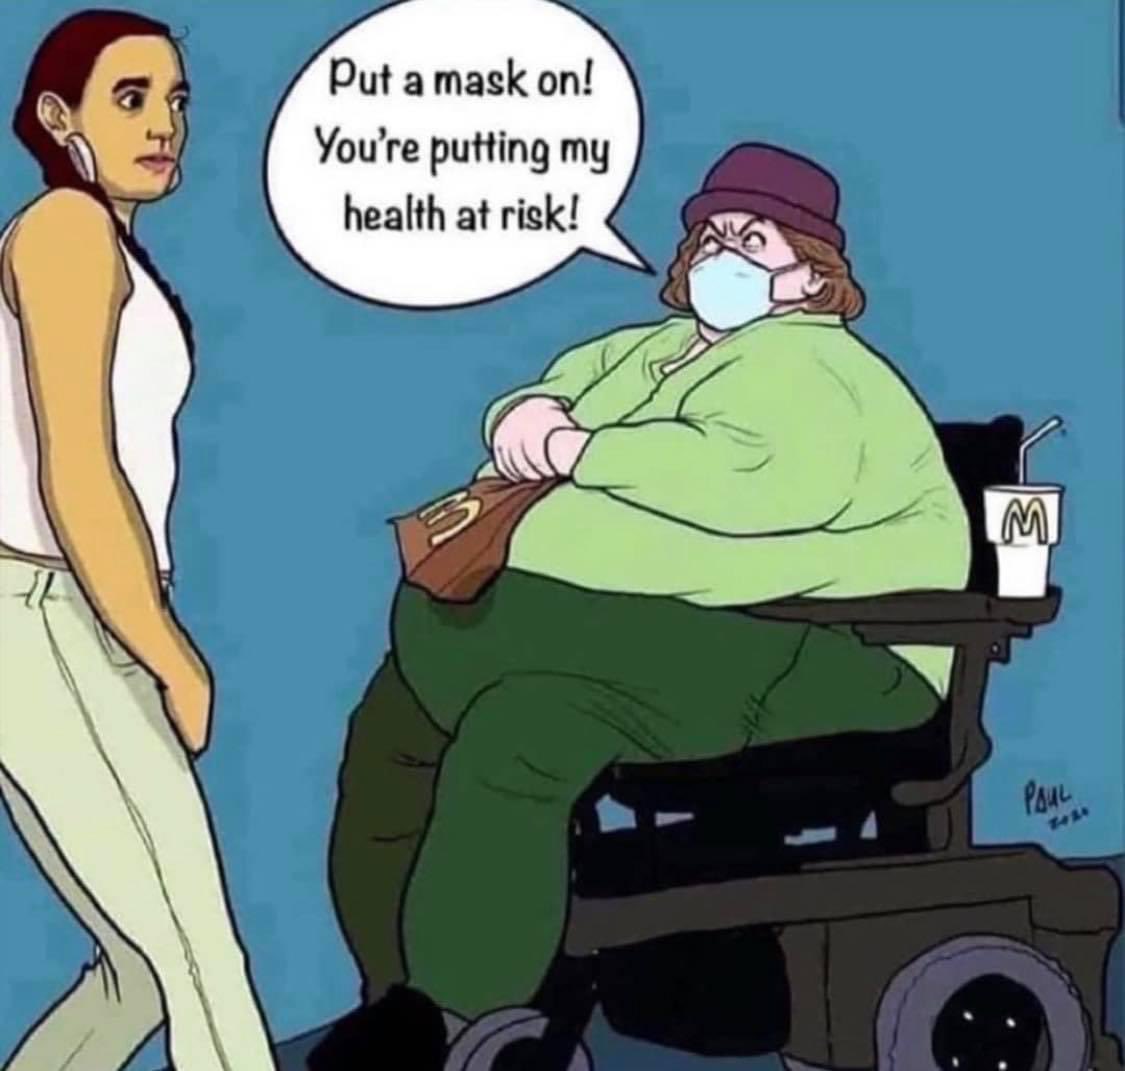 put a mask on, you're putting my health at risk!